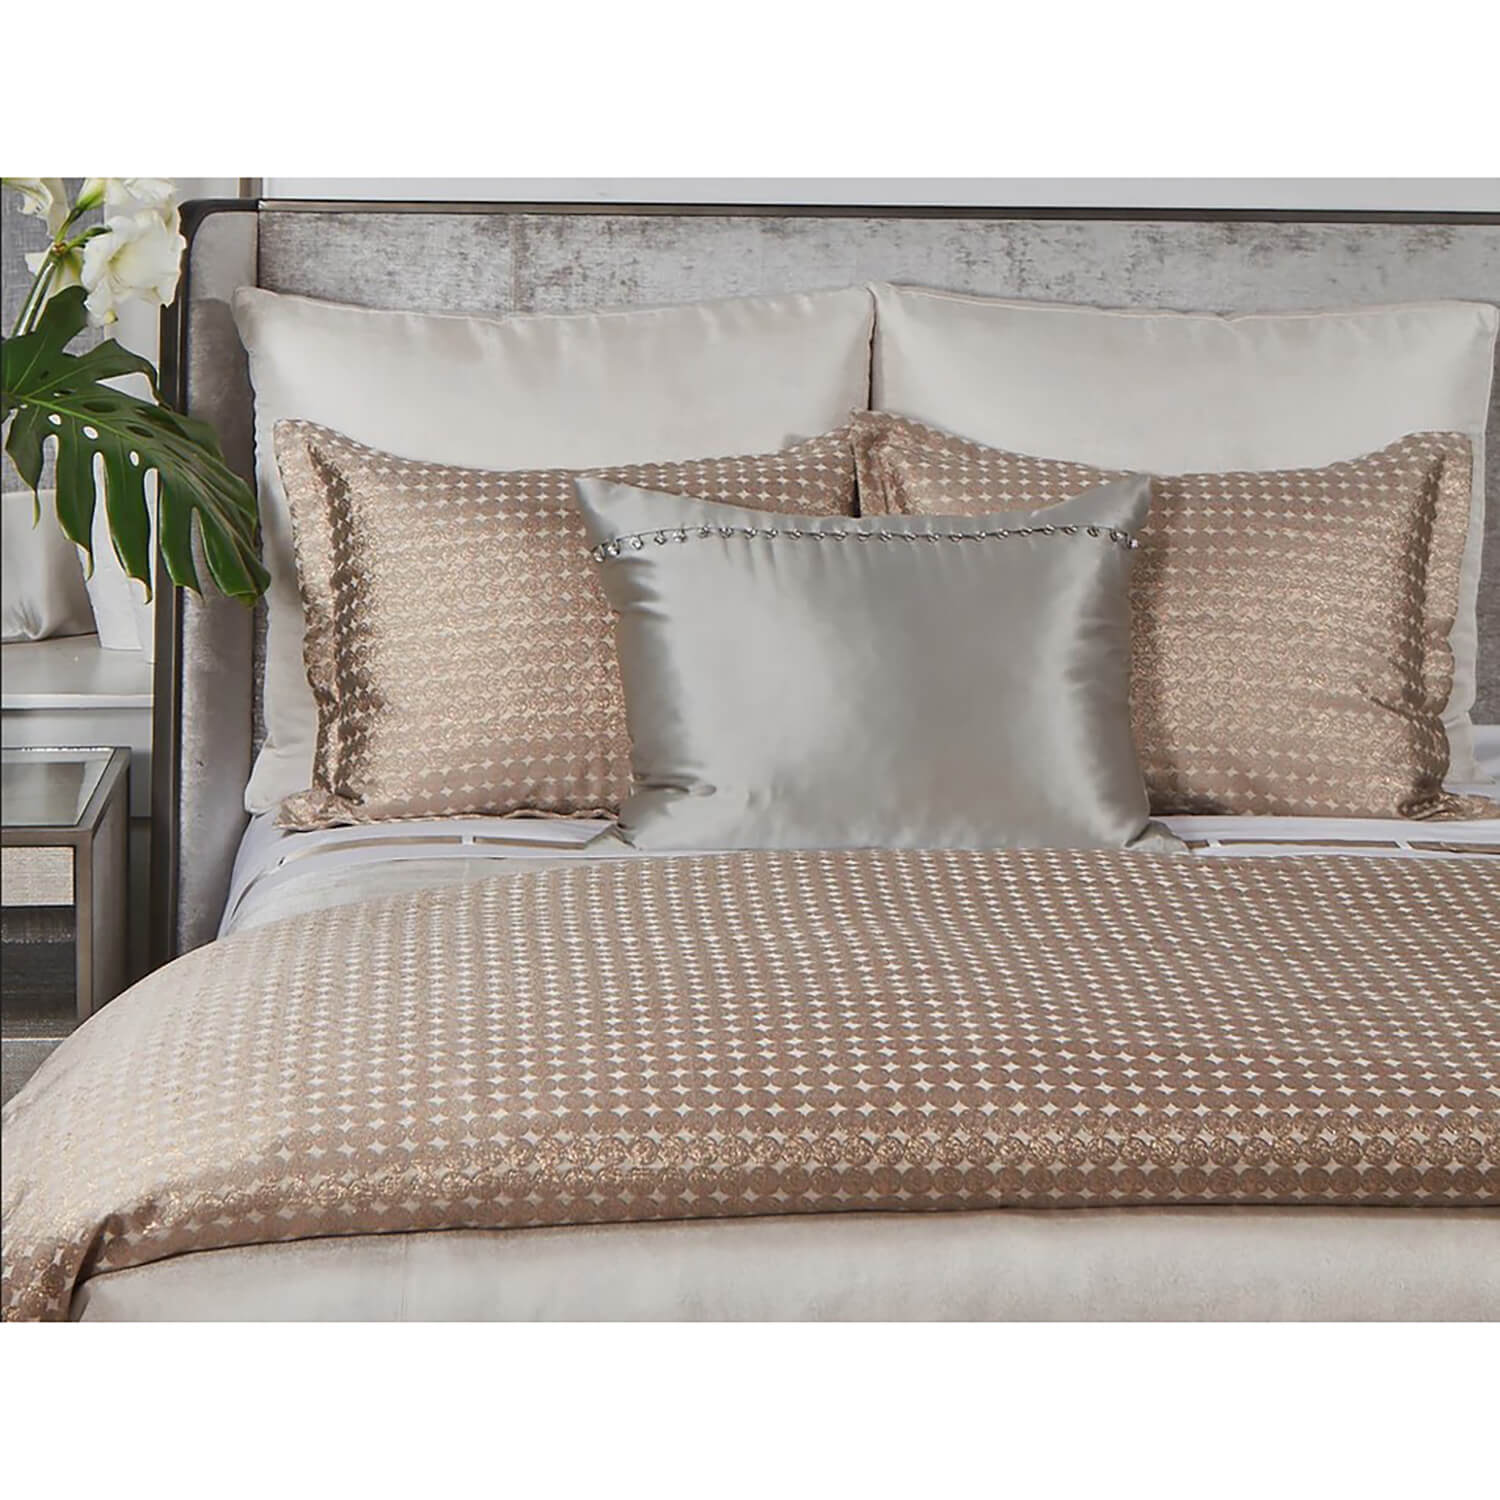 Image of Coin Duvet Set, Gold Pumice